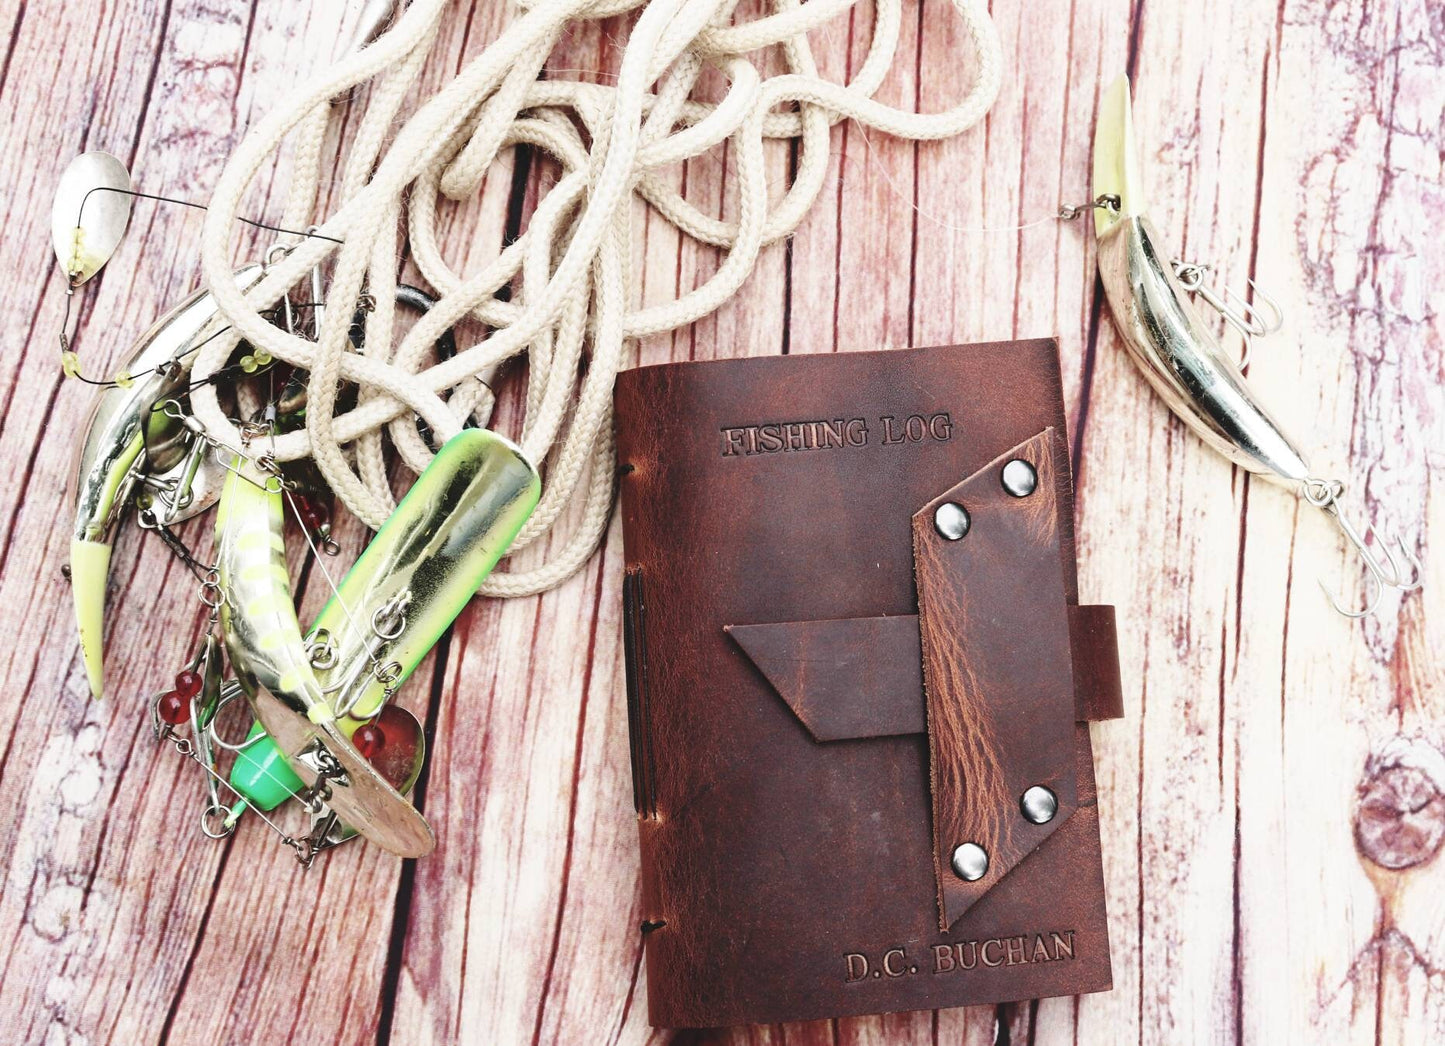 Leather Fishing Journal, Rustic Fisherman Log Book, Fathers Day Gift, Sewn Bound Full Grain Leather, Personalized Gift for Dad or Anglers